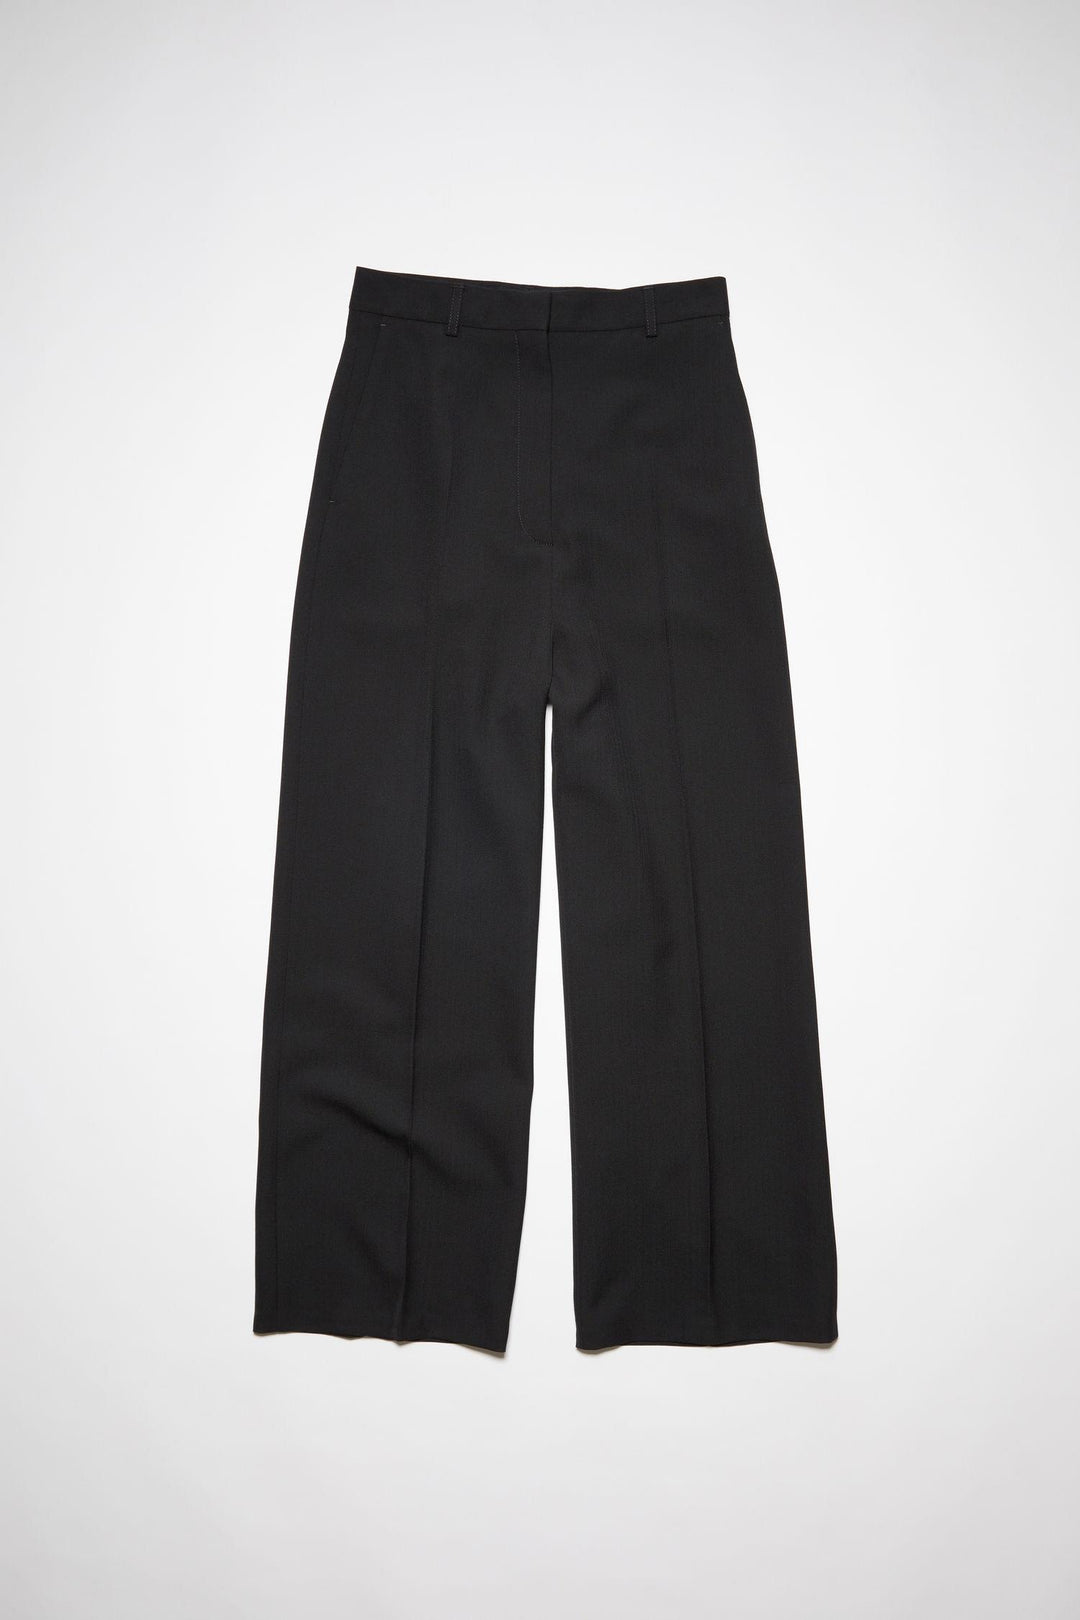 ACNE STUDIOS - Tailored Wool Trousers - BLACK - Dale